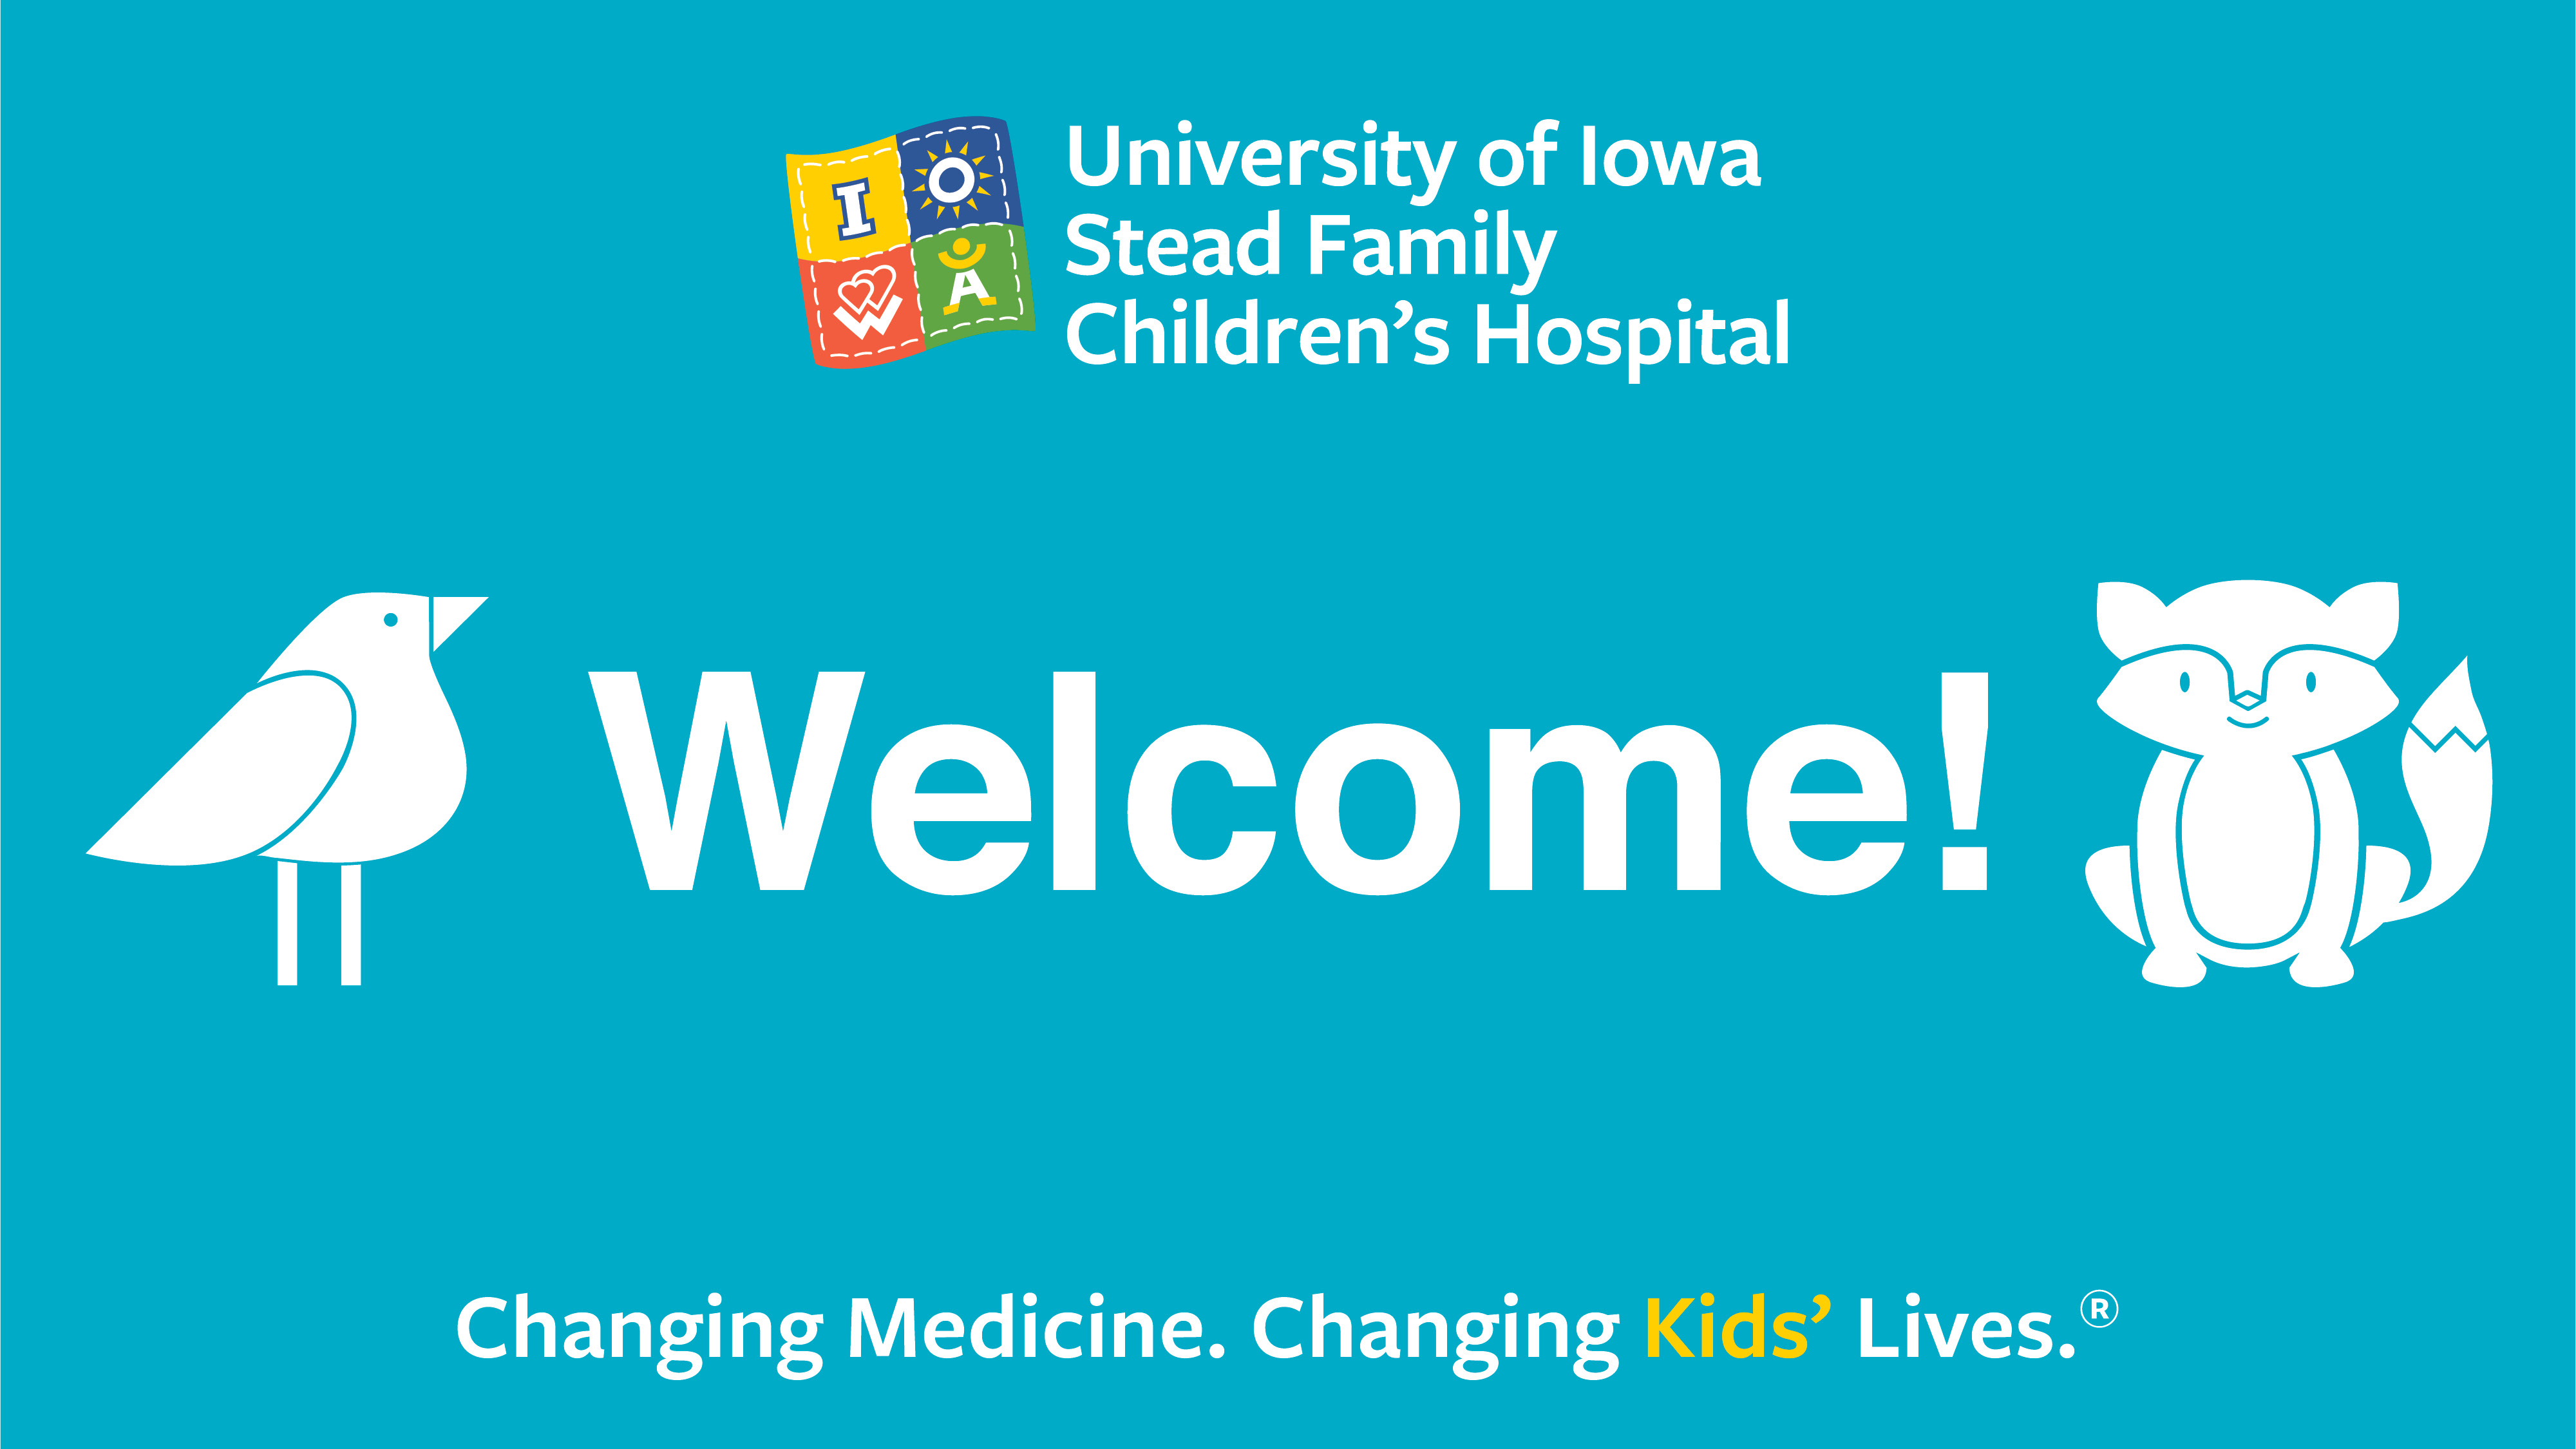 Welcome to the UI Stead Family Children's Hospital